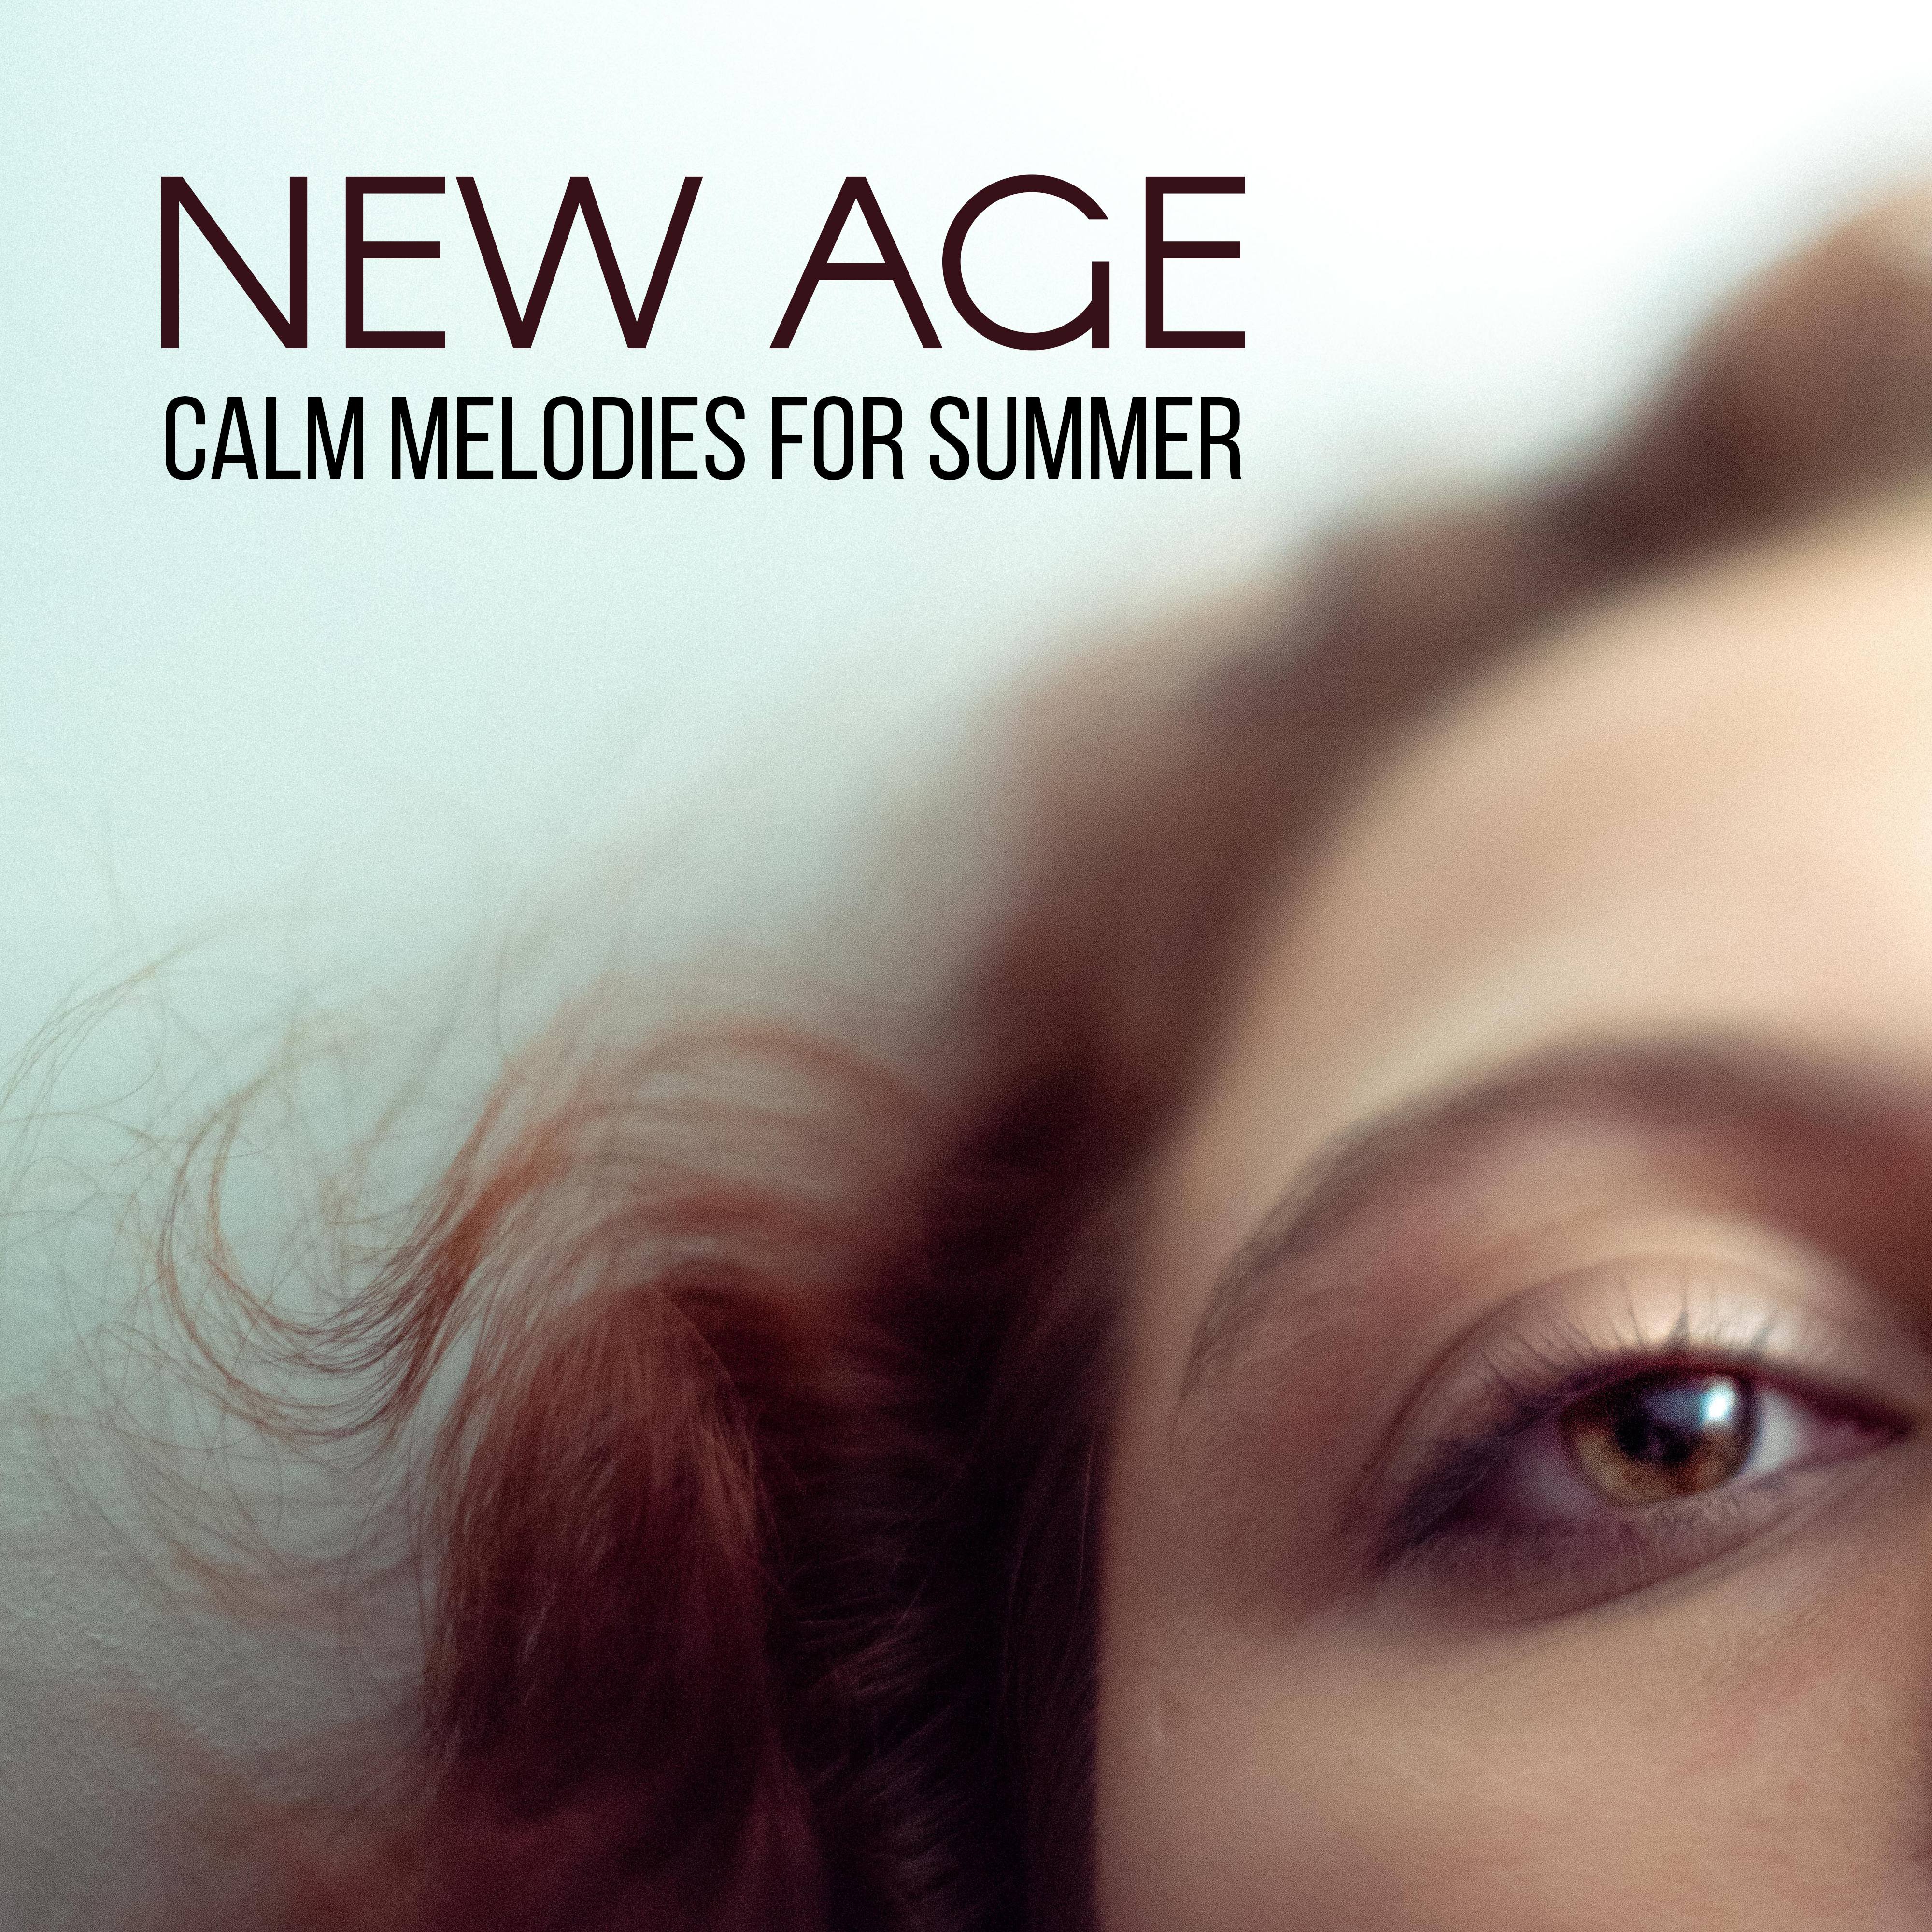 New Age Calm Melodies for Summer